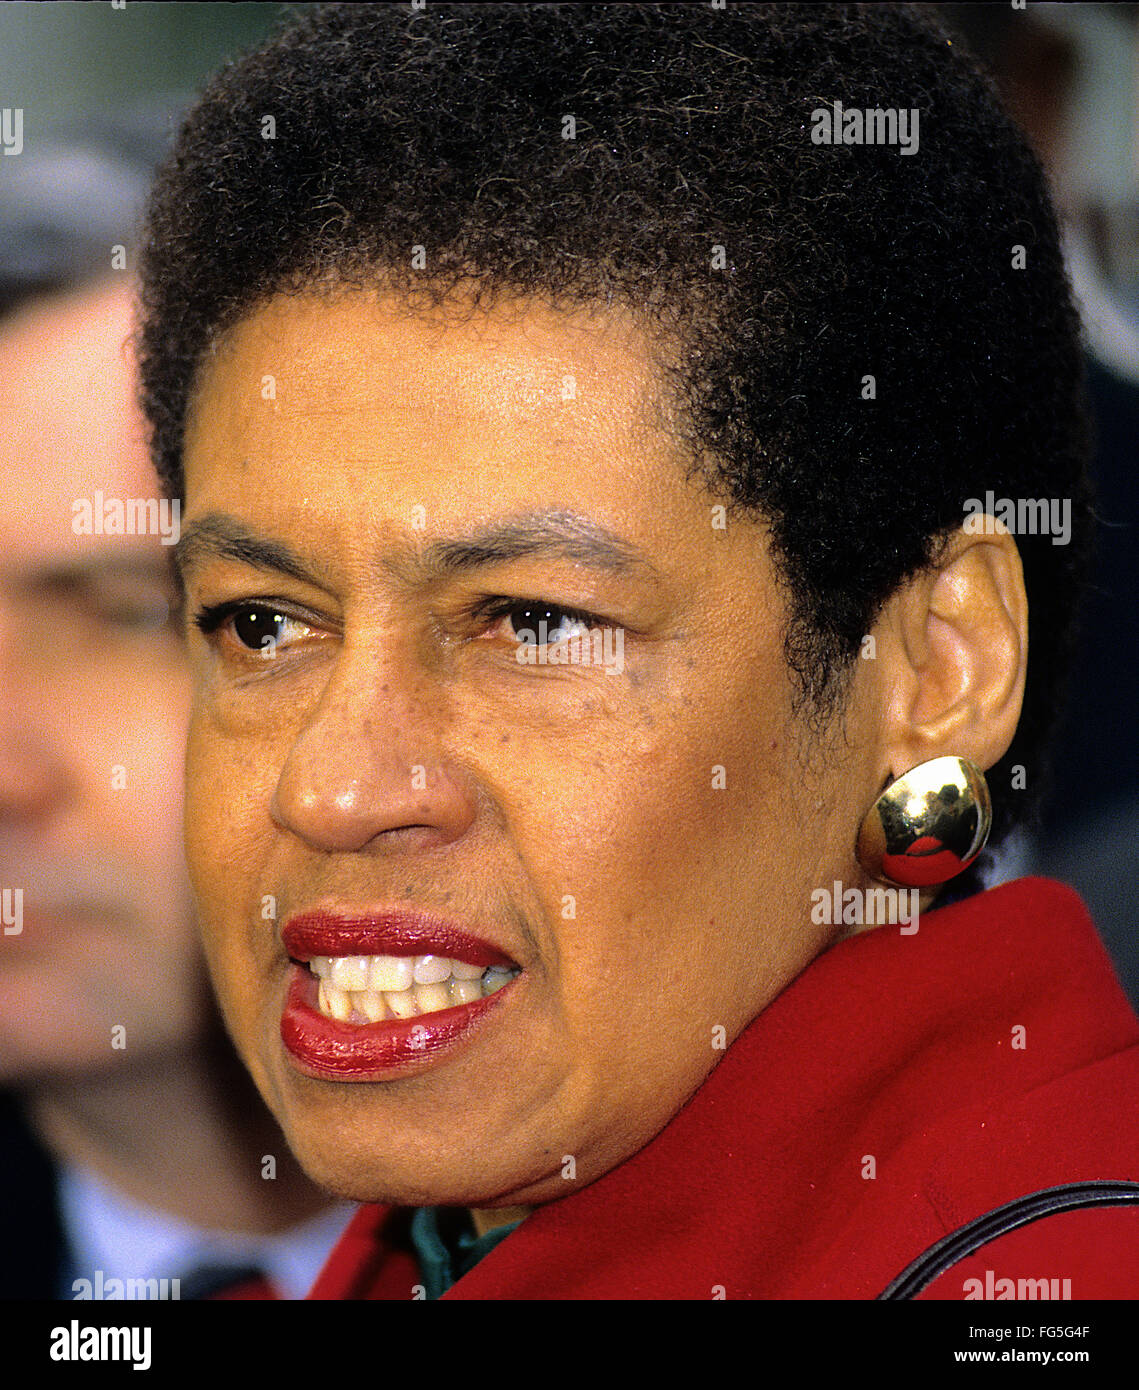 Washington, DC., USA,  1993 Congresswoman Eleanor Holmes Norton. Eleanor Holmes Norton is a Delegate to the United States Congress representing the District of Columbia. As a non-voting delegate to the U.S. House of Representatives, Norton may serve on committees, as well as speak on the House floor; however, she is not permitted to vote on the final passage of any legislation. As a quasi-member of the House, Norton is known as 'D.C. Delegate, Eleanor Holmes Norton'. Credit: Mark Reinstein Stock Photo